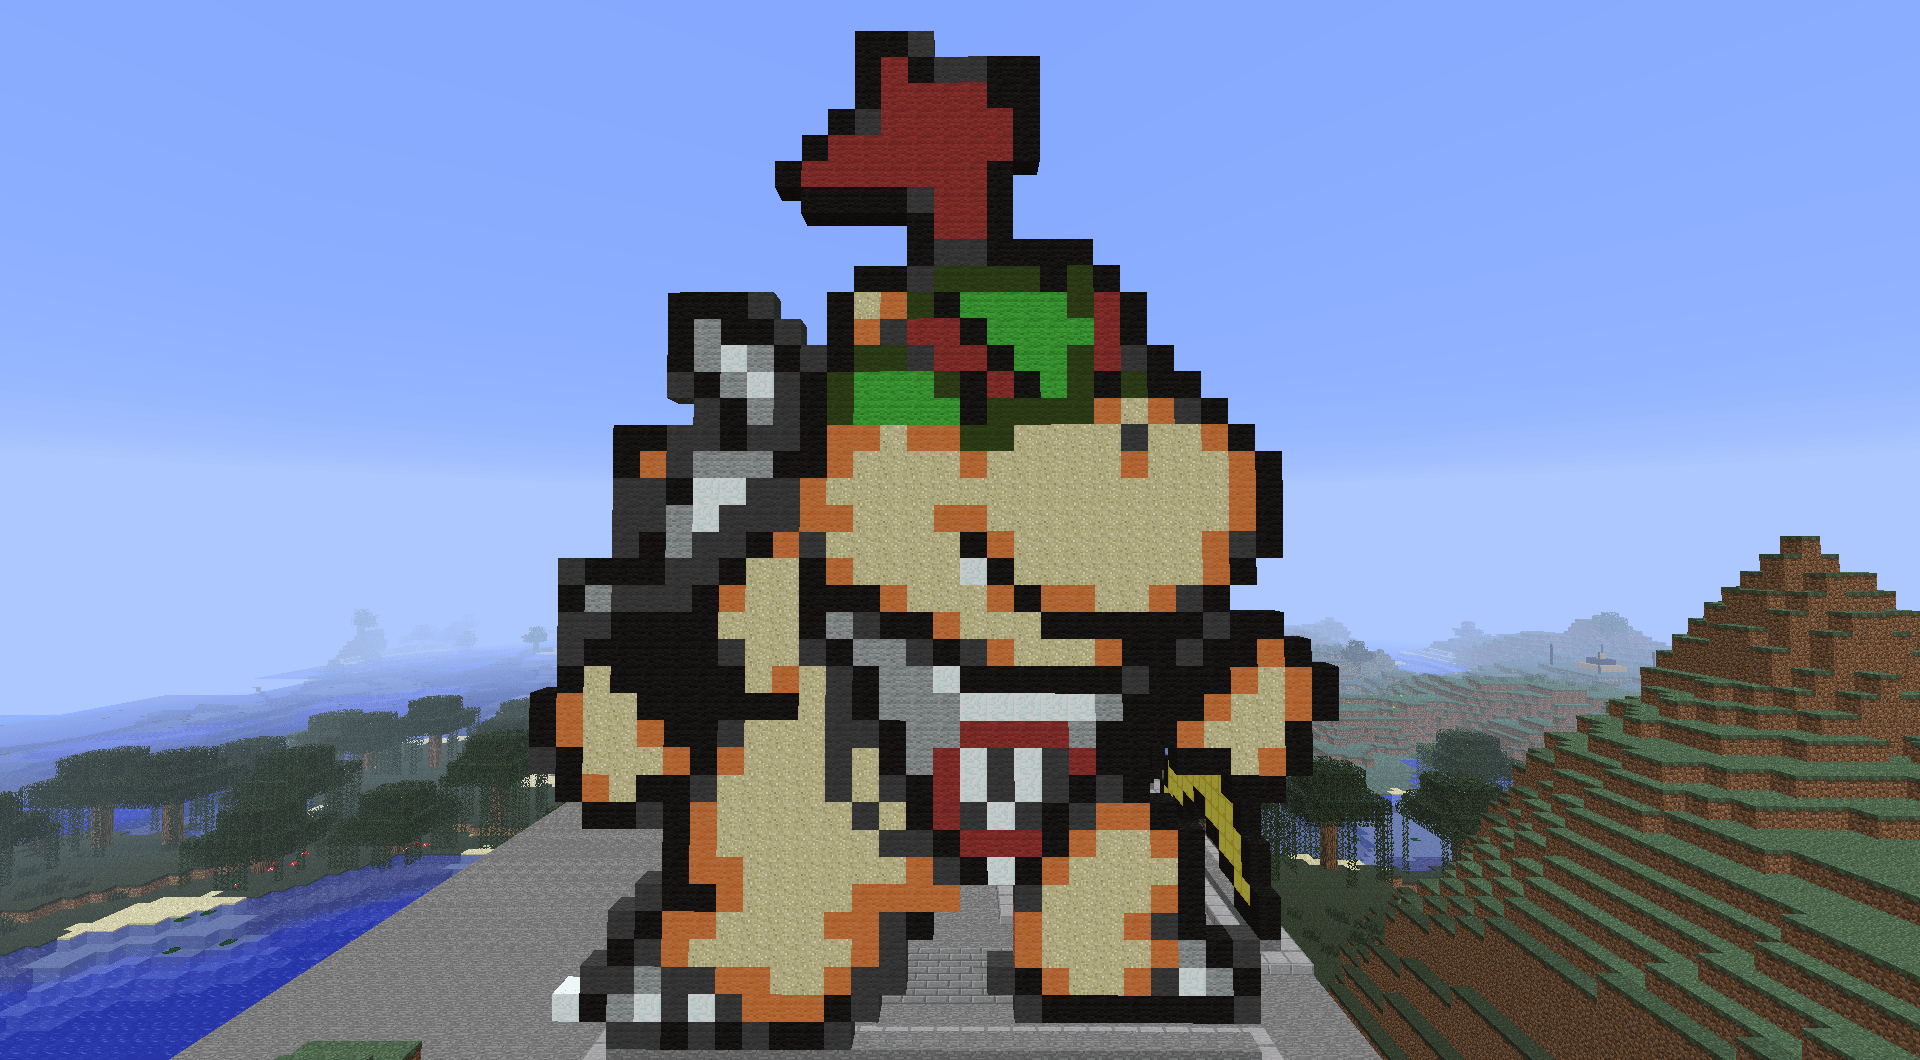 Minecraft pixel art of Bowser from the Mario franchise - Bowser